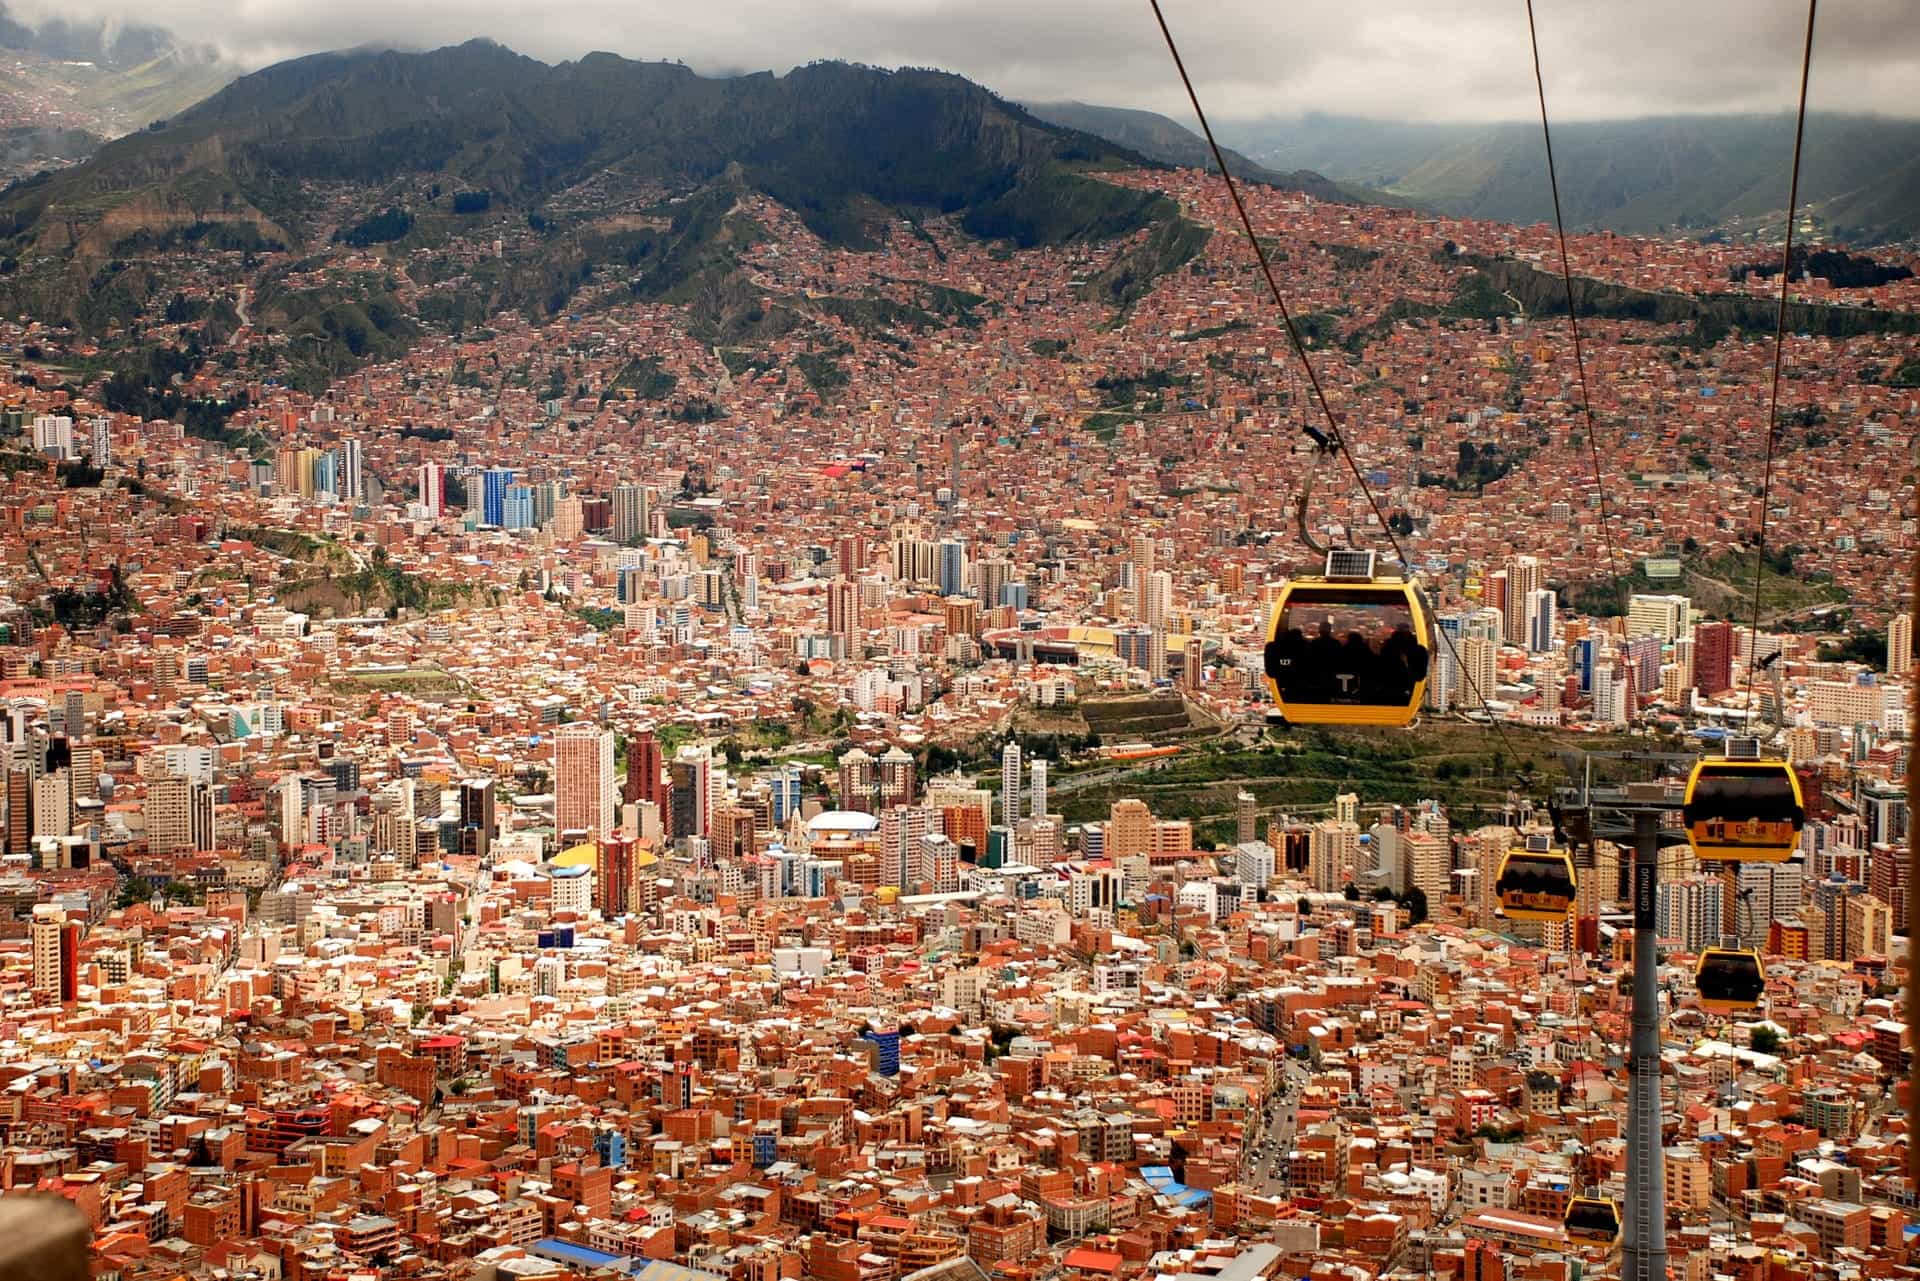 Cable cars overlook a sprawling Bolivian city.